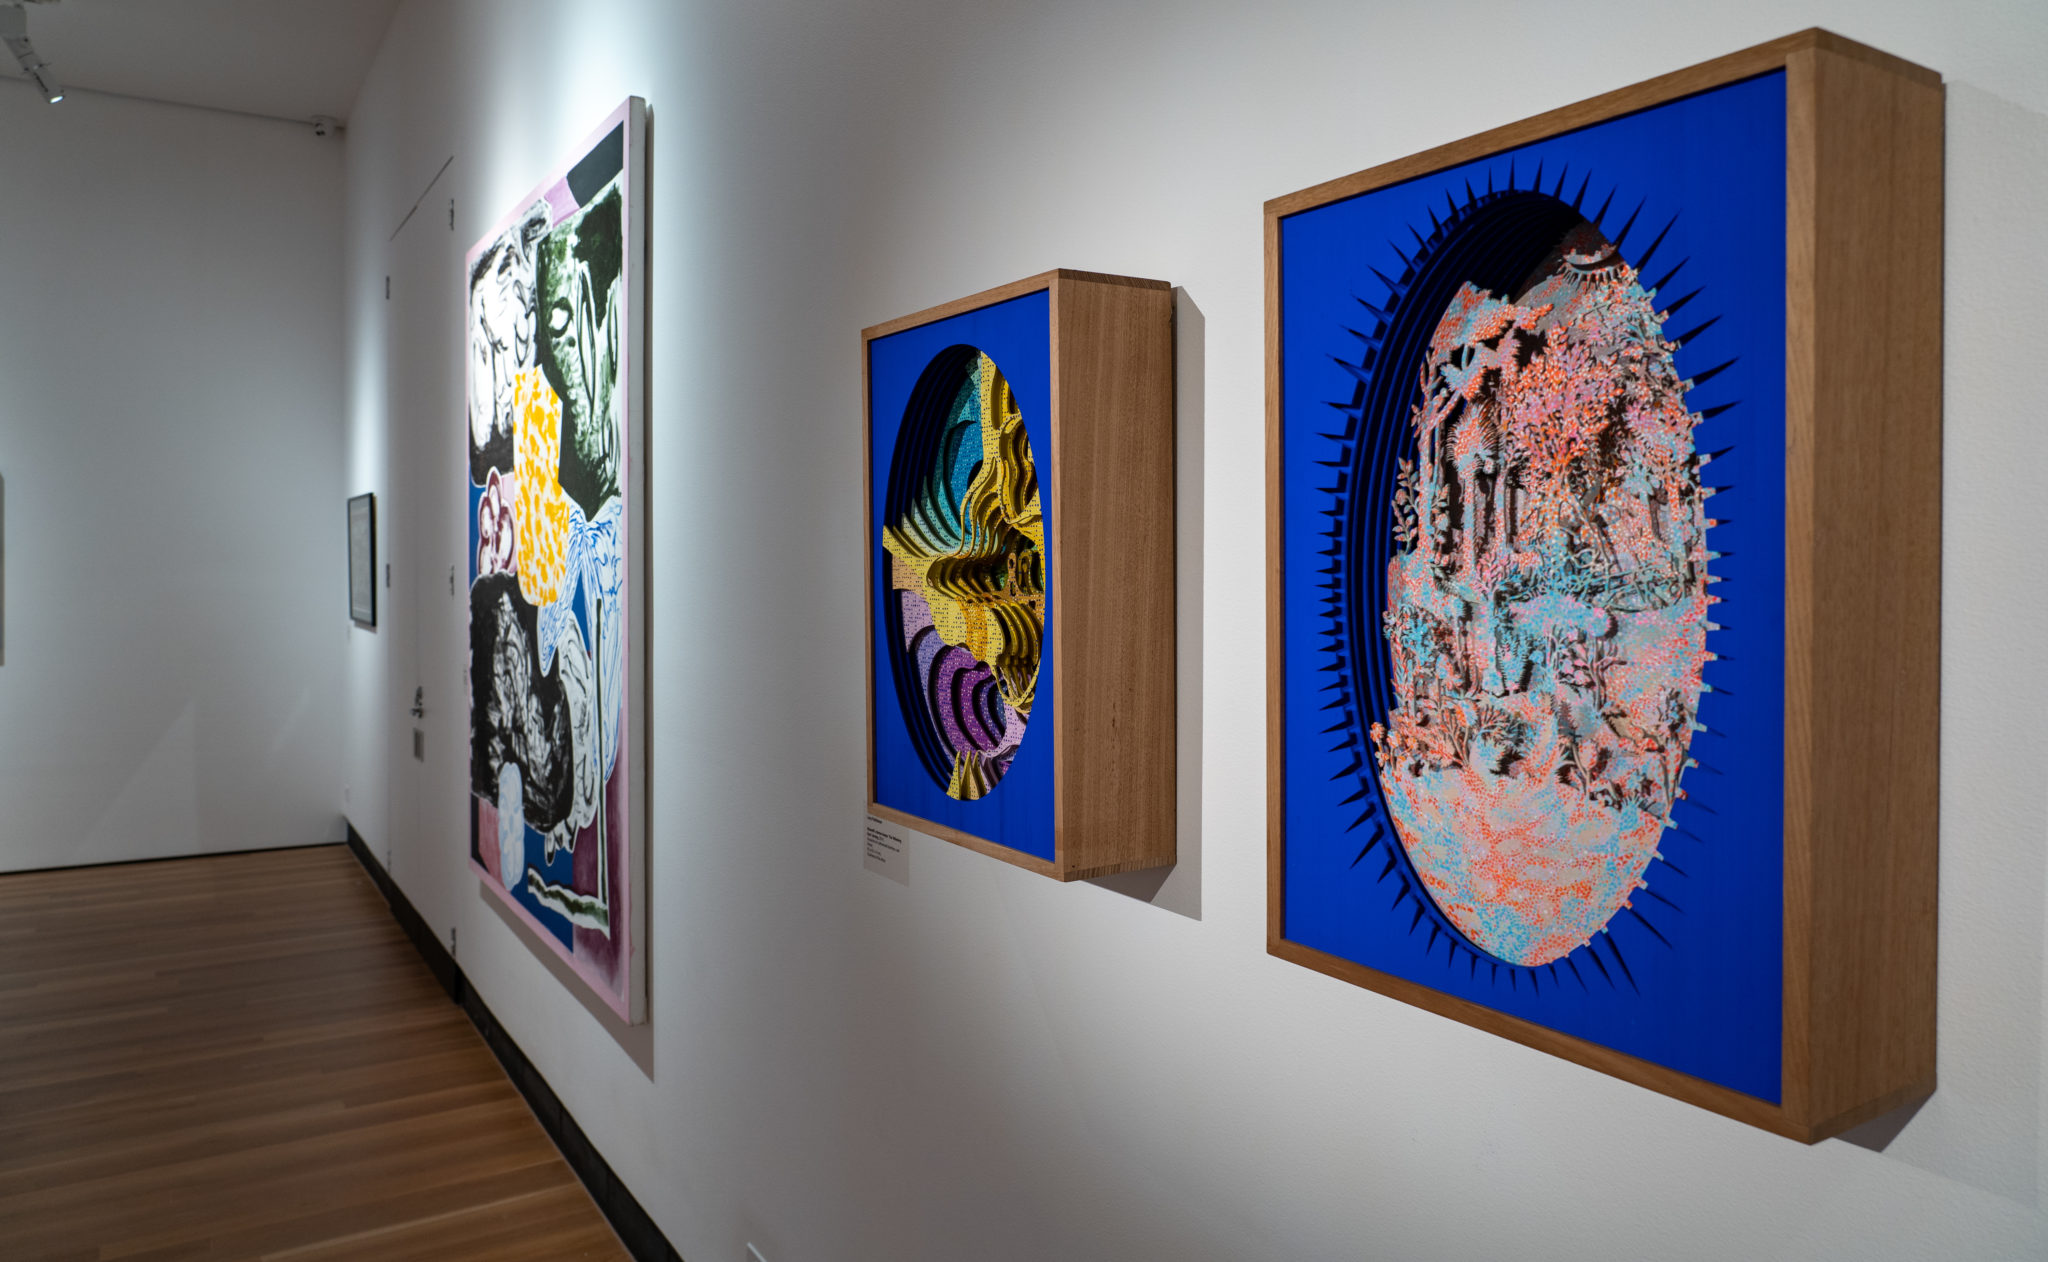 Exhibition documentation of 50 Years, 50 Artists, at Latrobe Regional Gallery, 2021. Pictured: (foreground left) Lucy Parkinson, The Cosmic Battle: neither devils nor divines, 2019, Gouache on carbonised bamboo, oak frame, 62 x 42 x 14 cm, Courtesy of the artist. (foreground right) Lucy Parkinson, Maxwell’s demon keeps ‘The Widening Gyre’ turning, 2019, Gouache on carbonised bamboo, oak frame, 62 x 42 x 14 cm, Courtesy of the artist. (background) Hayden Jackson, Untitled, 2019, Acrylic and charcoal on canvas, 200 x 180 cm, Courtesy the artist.